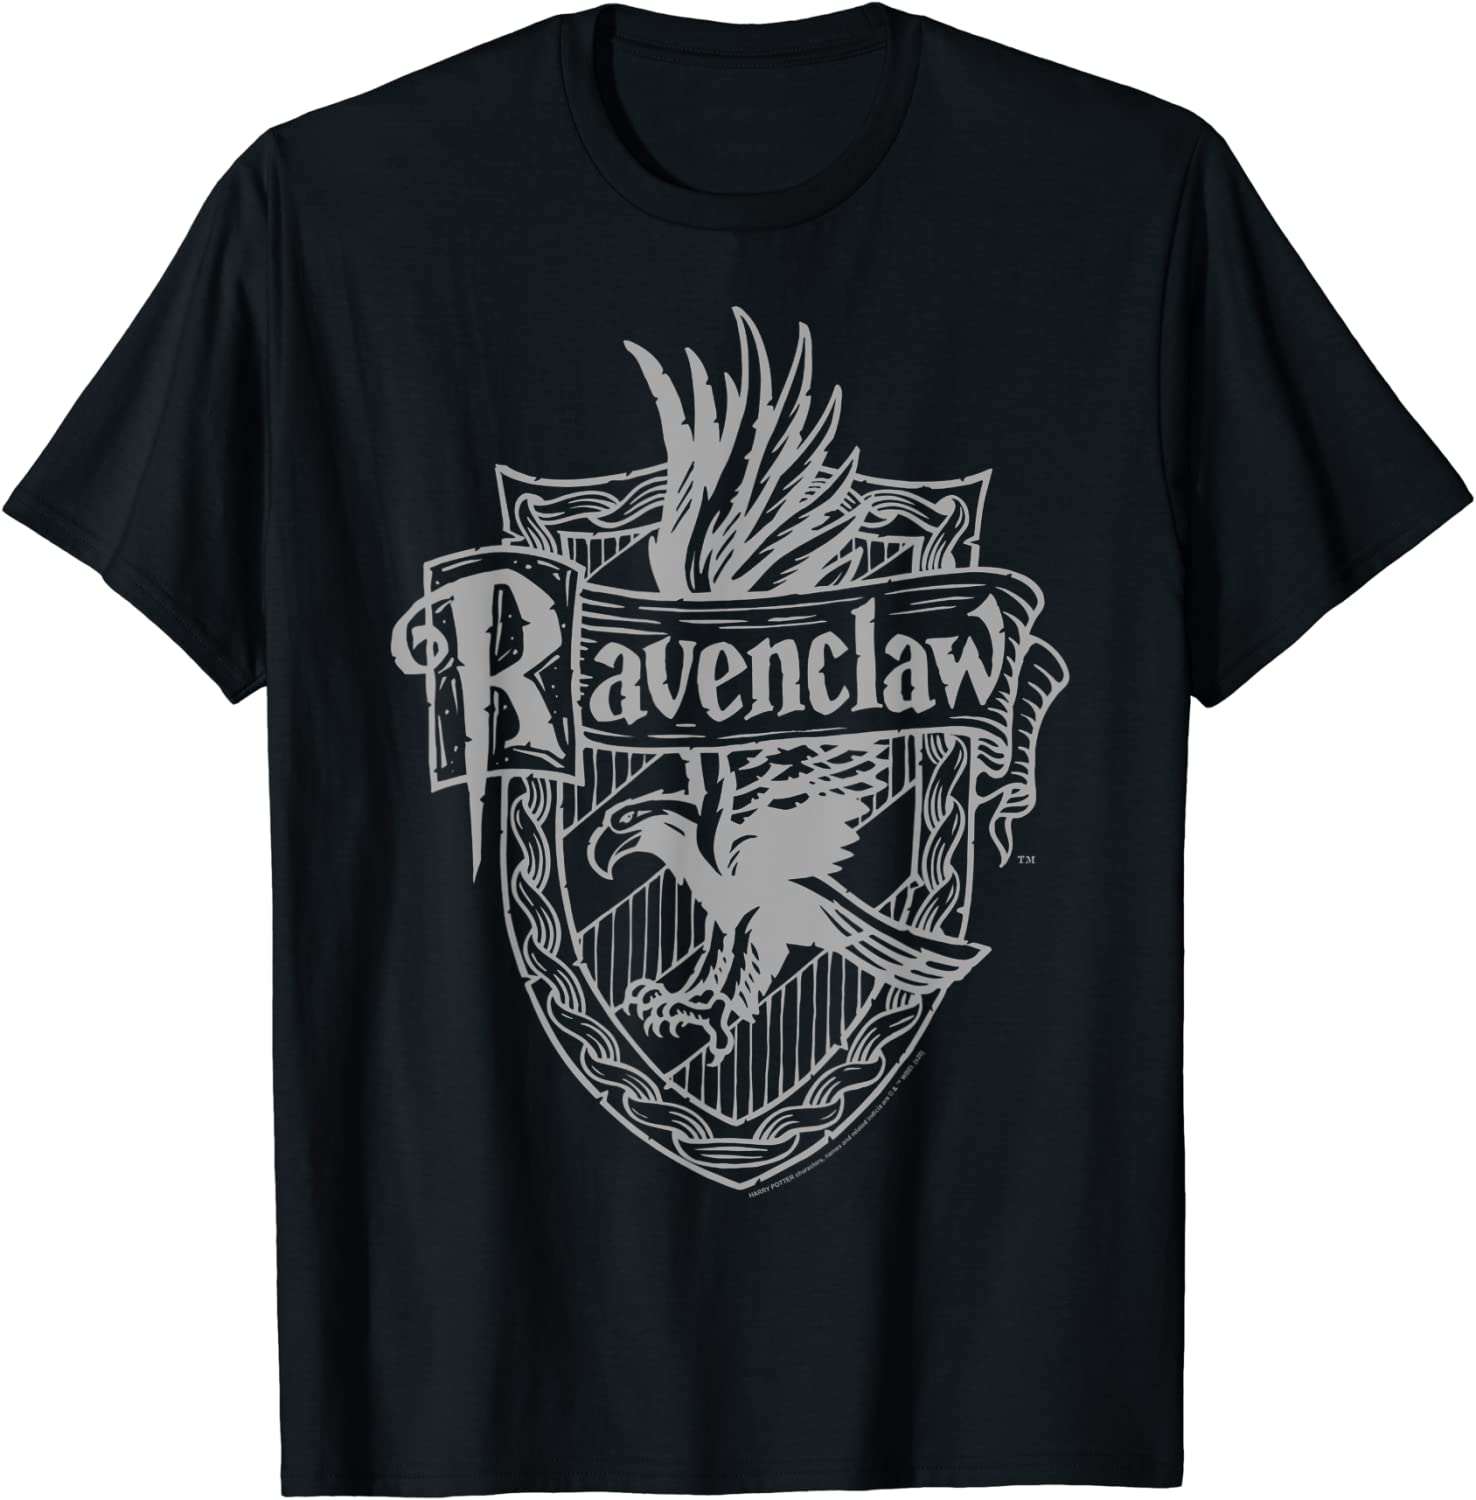 Potter Harry Comfortable And Potter Ravenclaw T-Shirt Shirt Soft Harry Crest Detailed